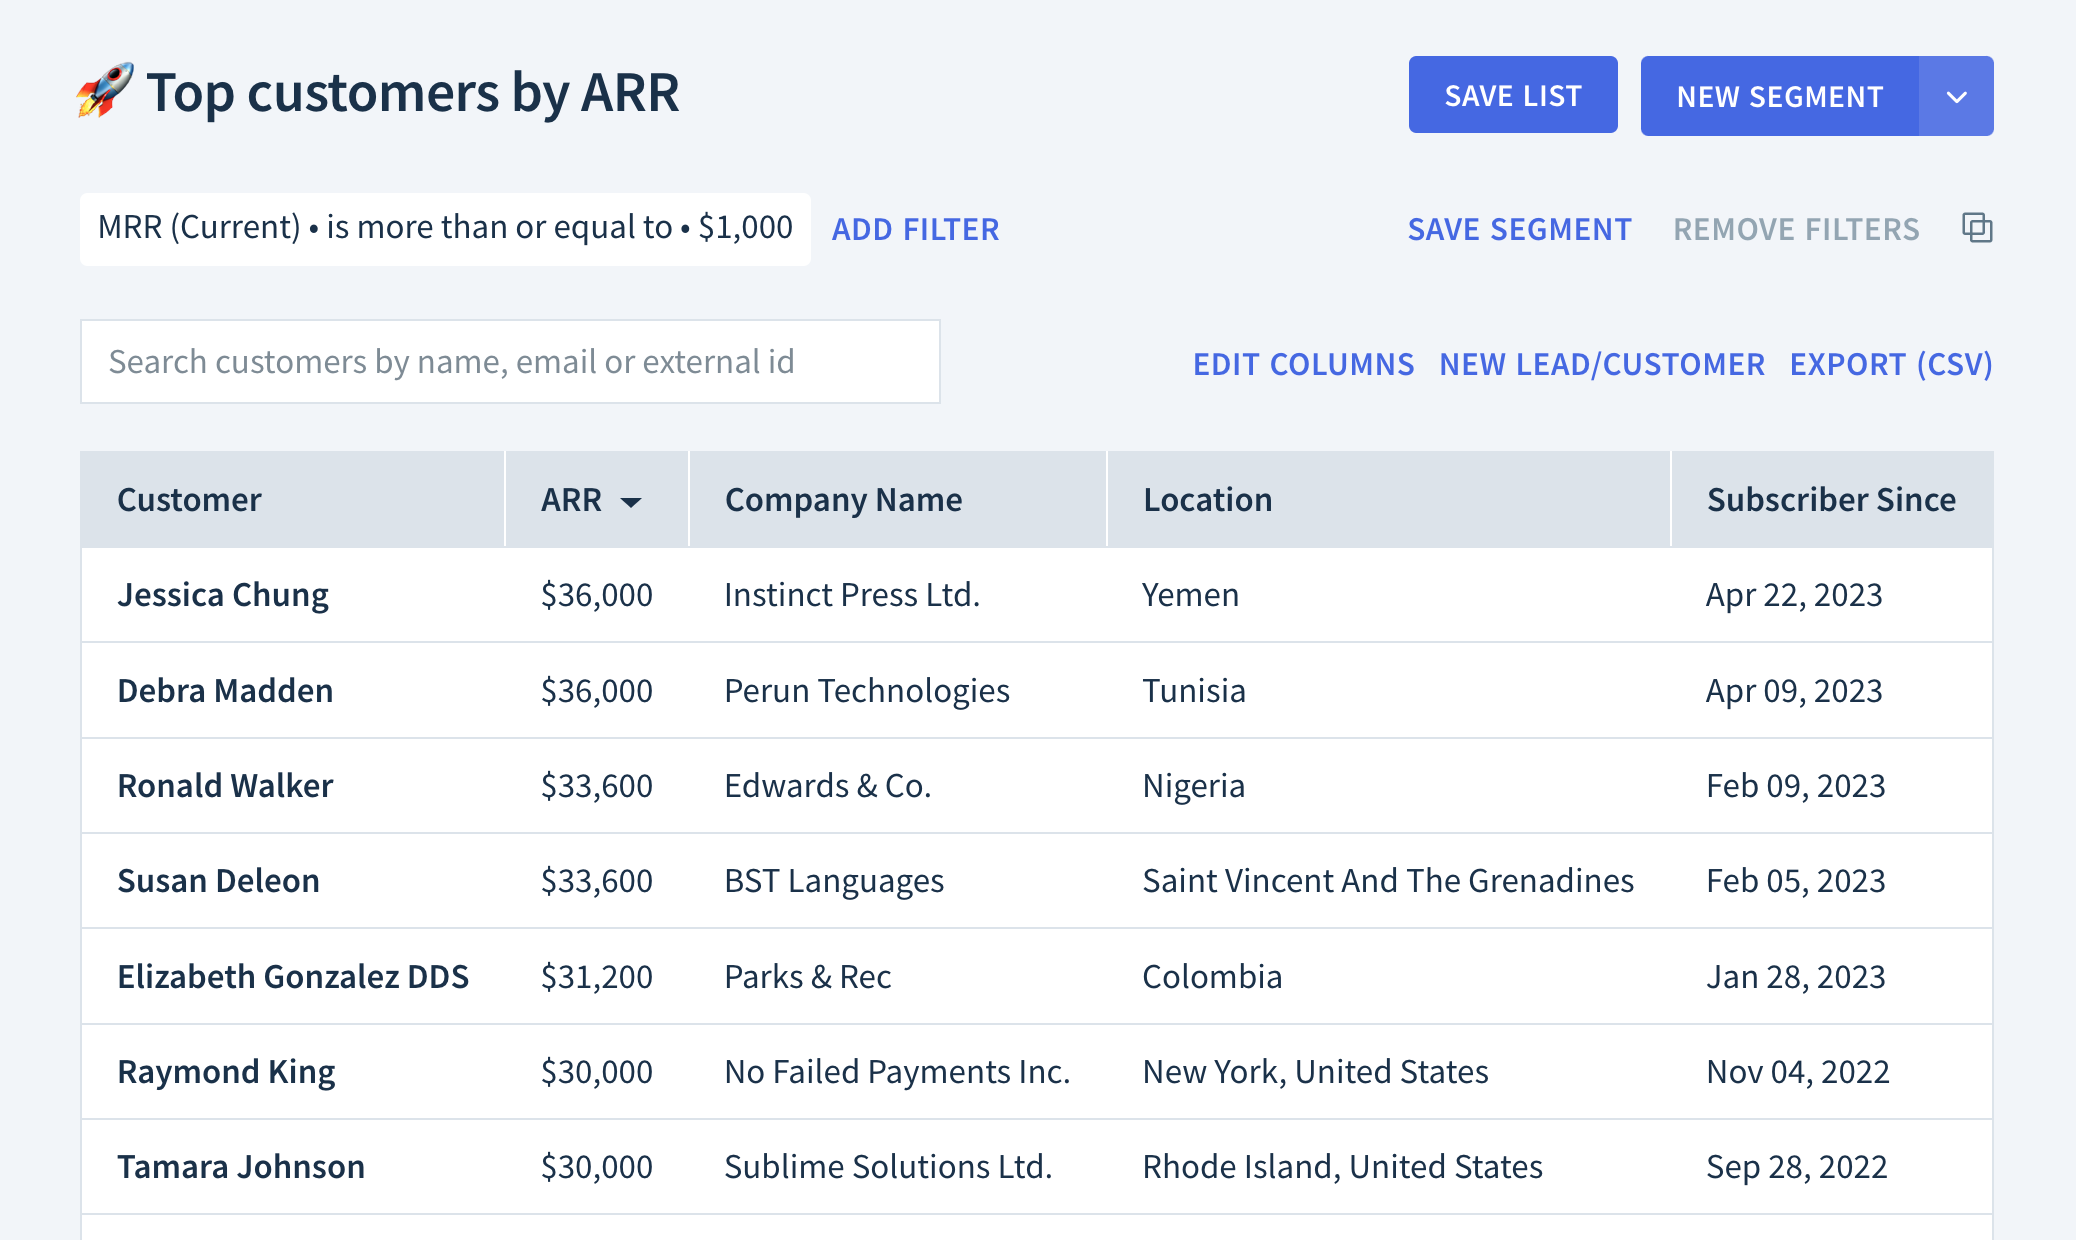 Screenshot of a custom customer list called Top customers by ARR, showing only five fields: Customer, ARR, Company Name, Location, and Subscriber Since. The list is sorted by ARR in descending order.